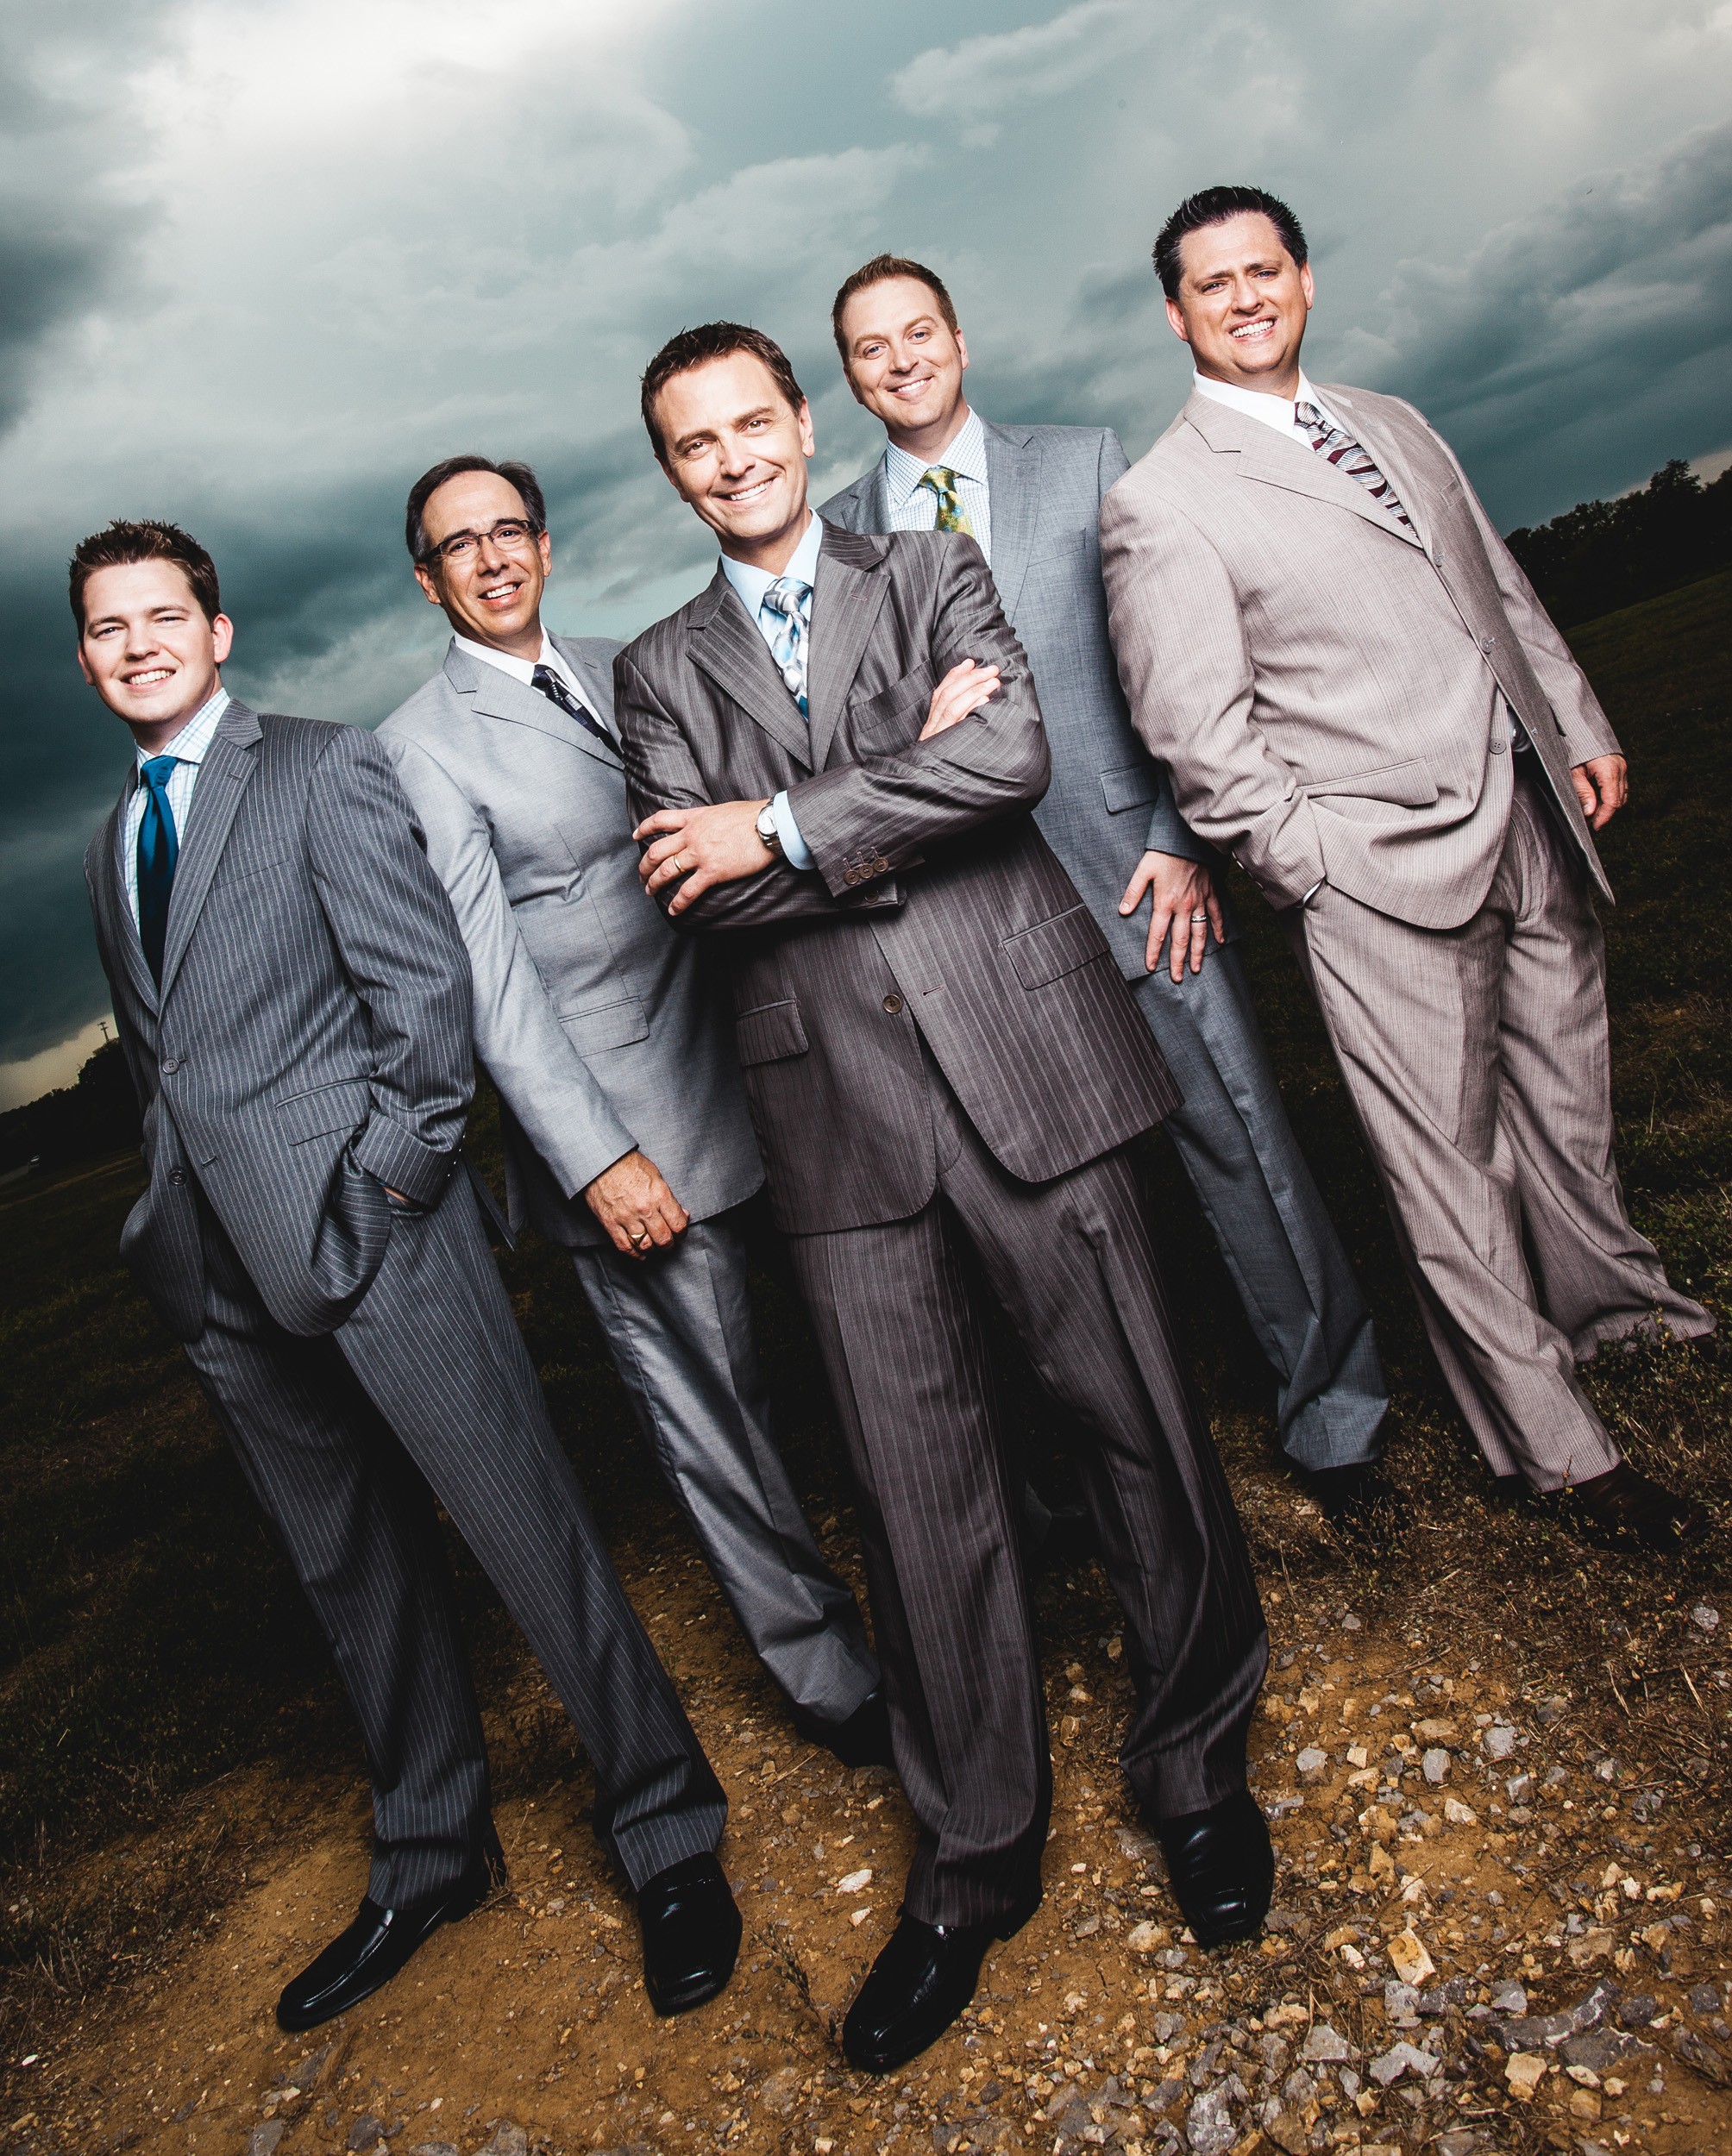 LEGACY – Legacy Five are just one of many gospel groups set to hit the Centrium stage during the Gospel Music Celebration July 11-13.